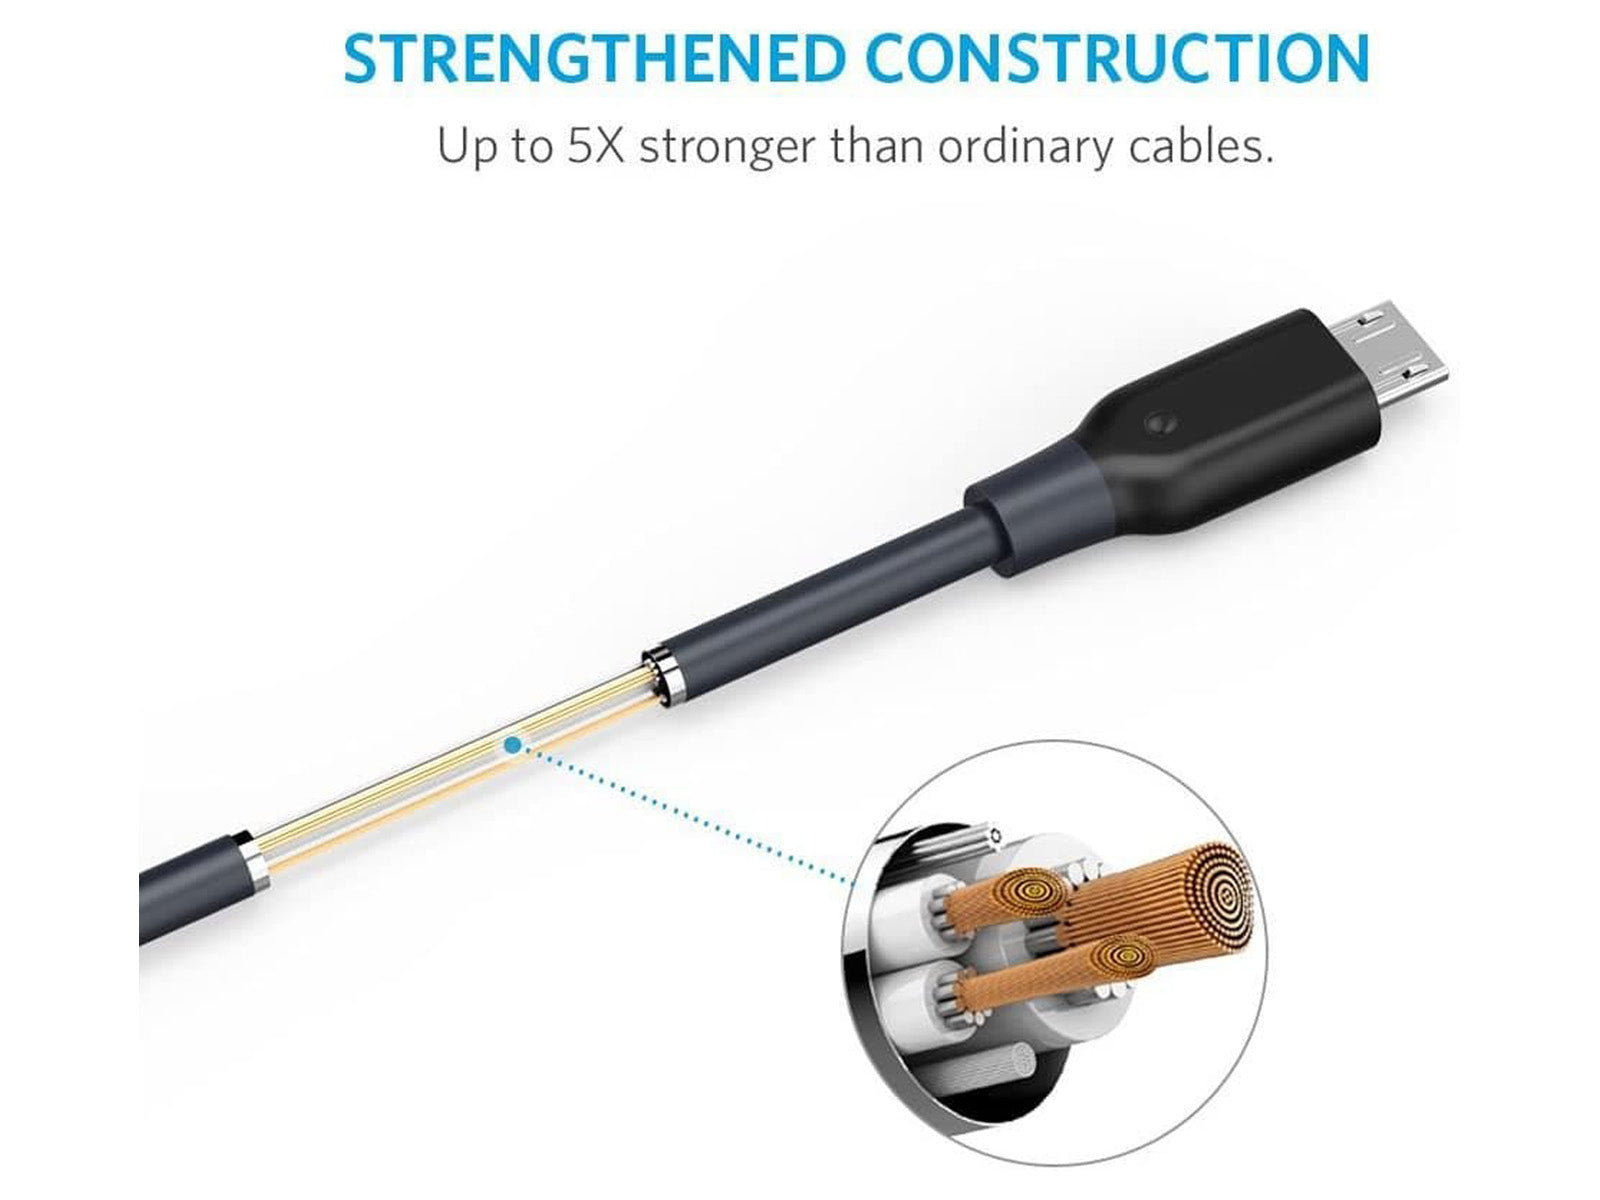 Image explains the strength of the PowerLine Select Micro USB High-Speed Charging Cable 